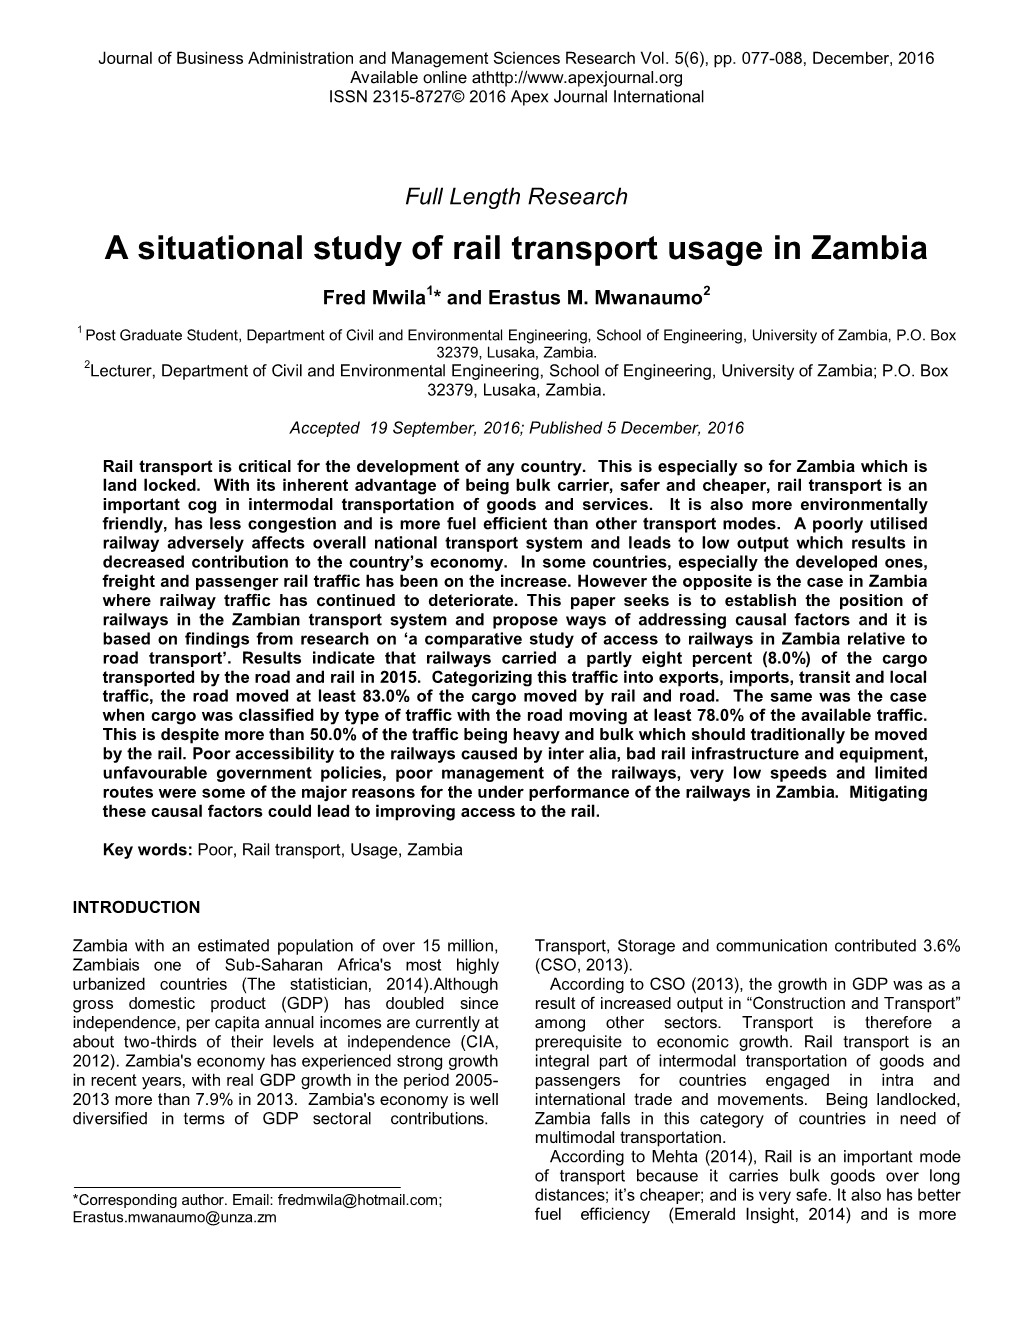 A Situational Study of Rail Transport Usage in Zambia